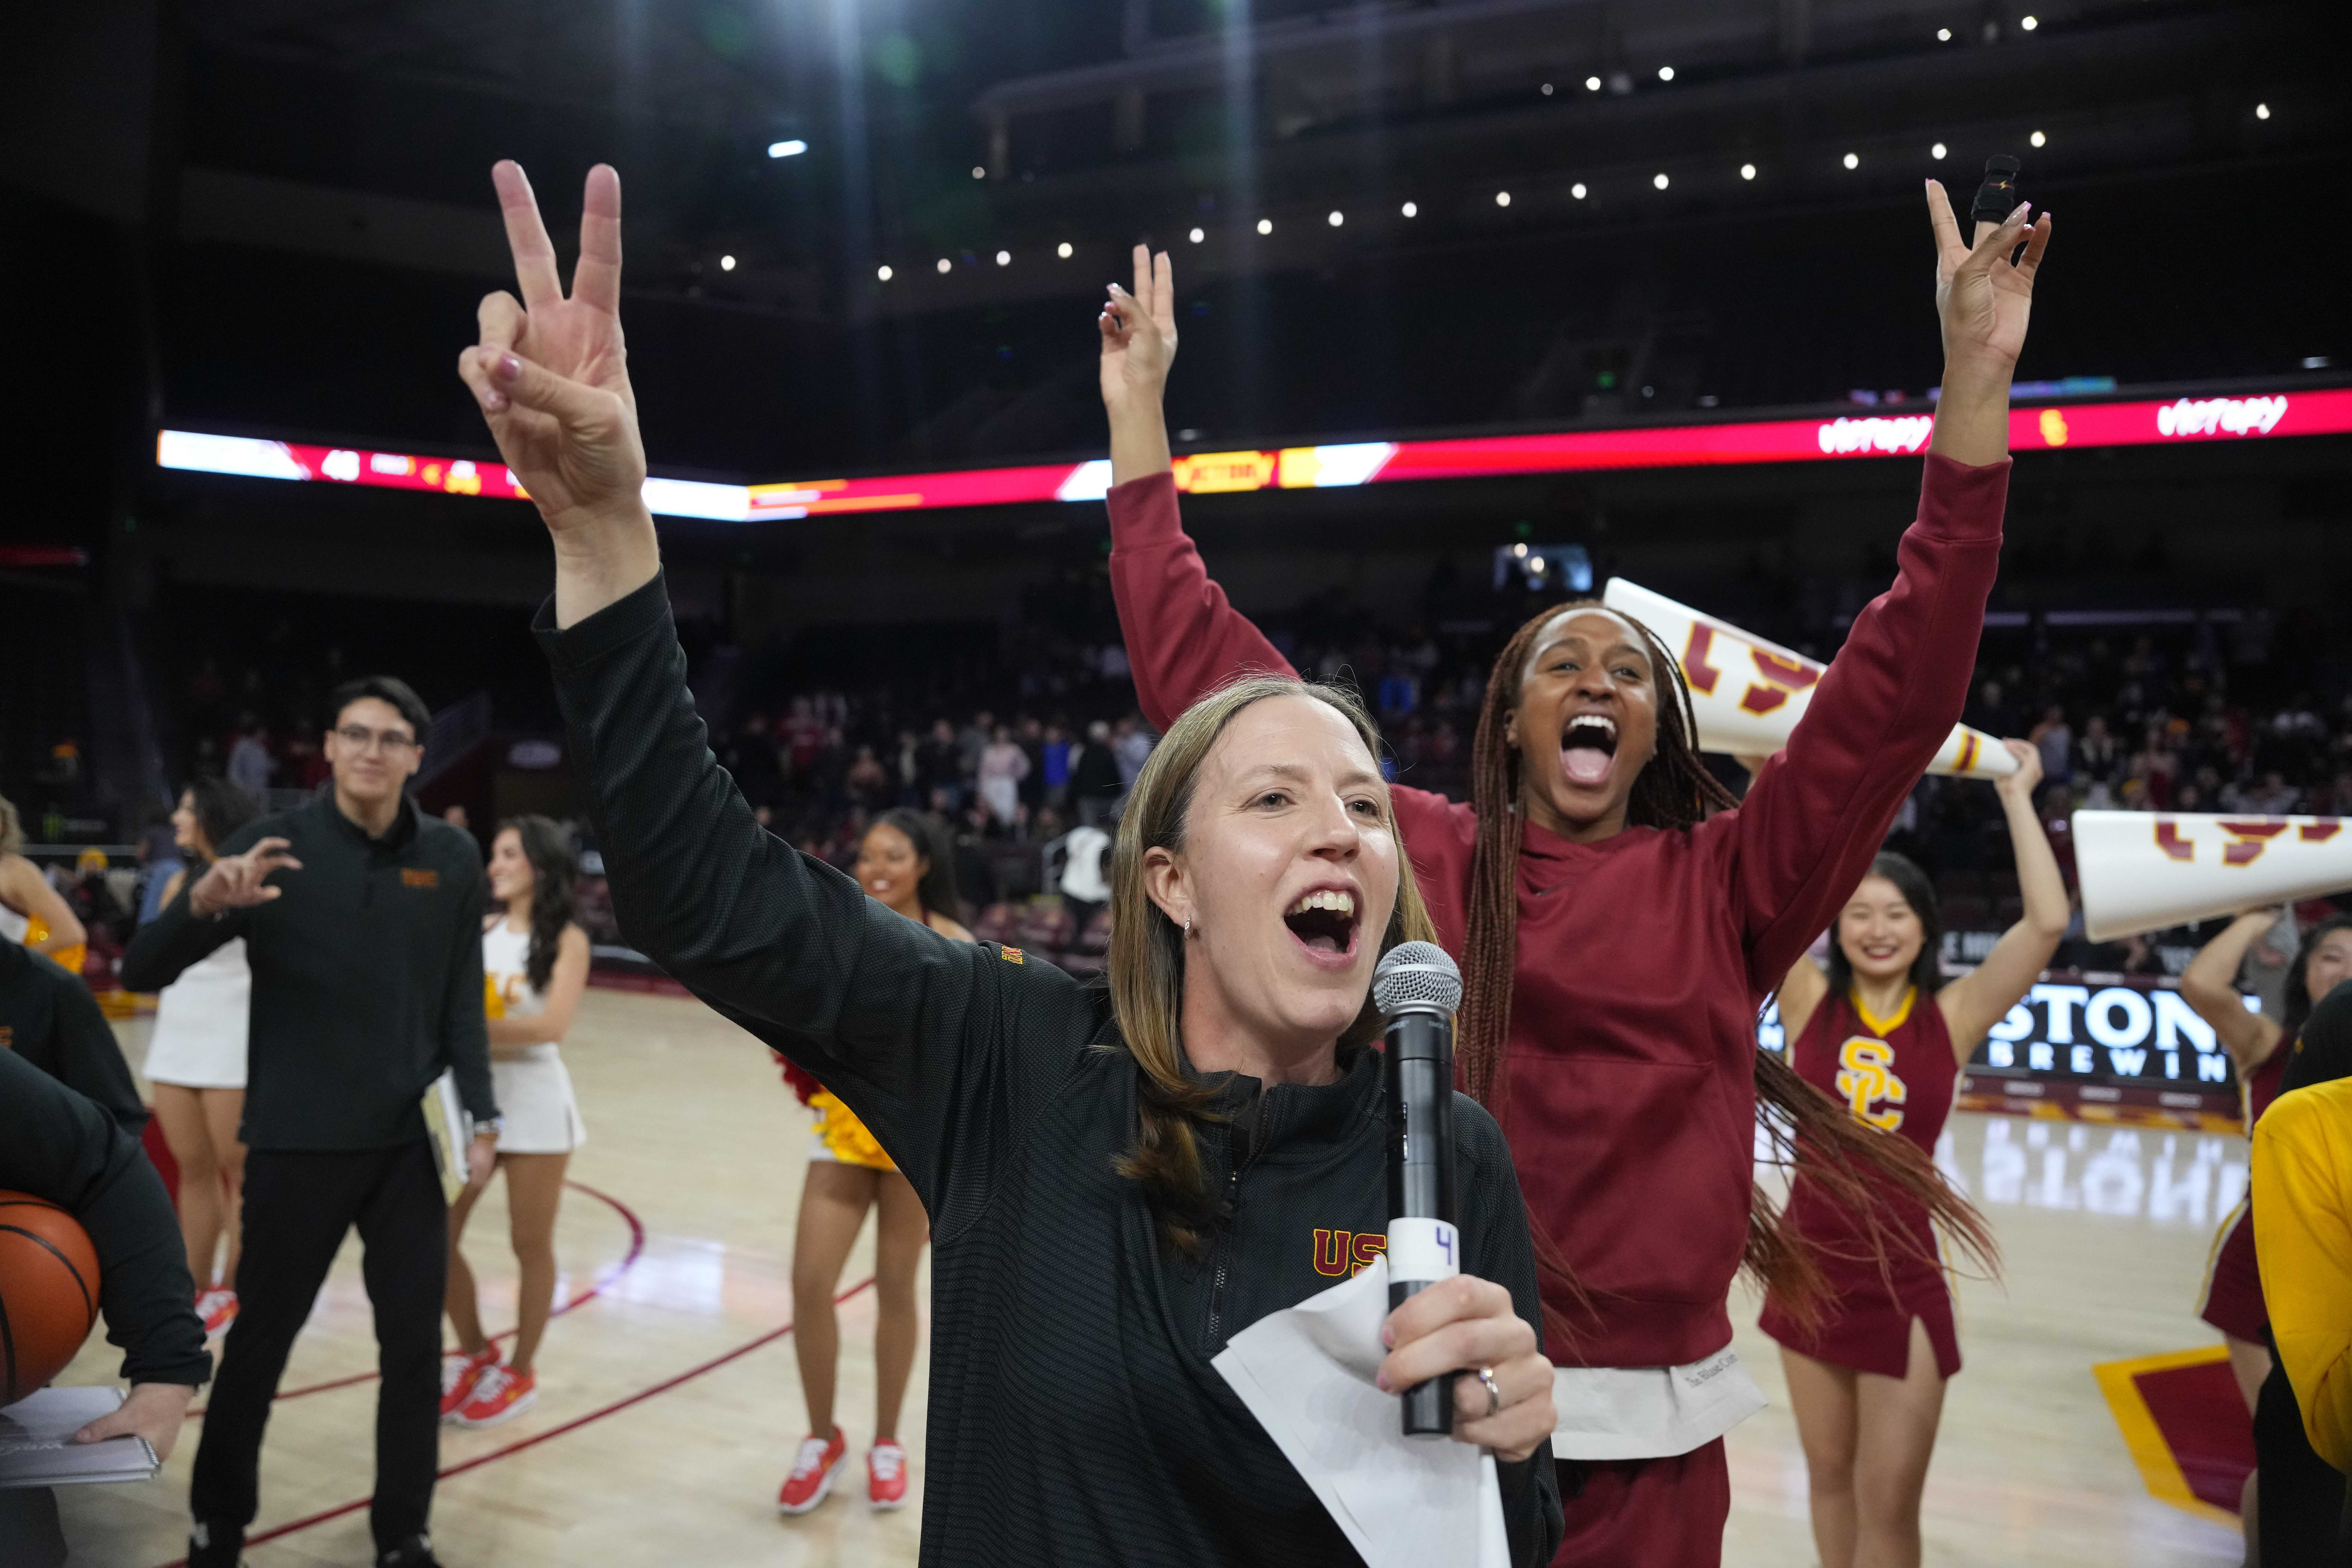 USC women’s basketball is in perfect position to benefit from new exposure